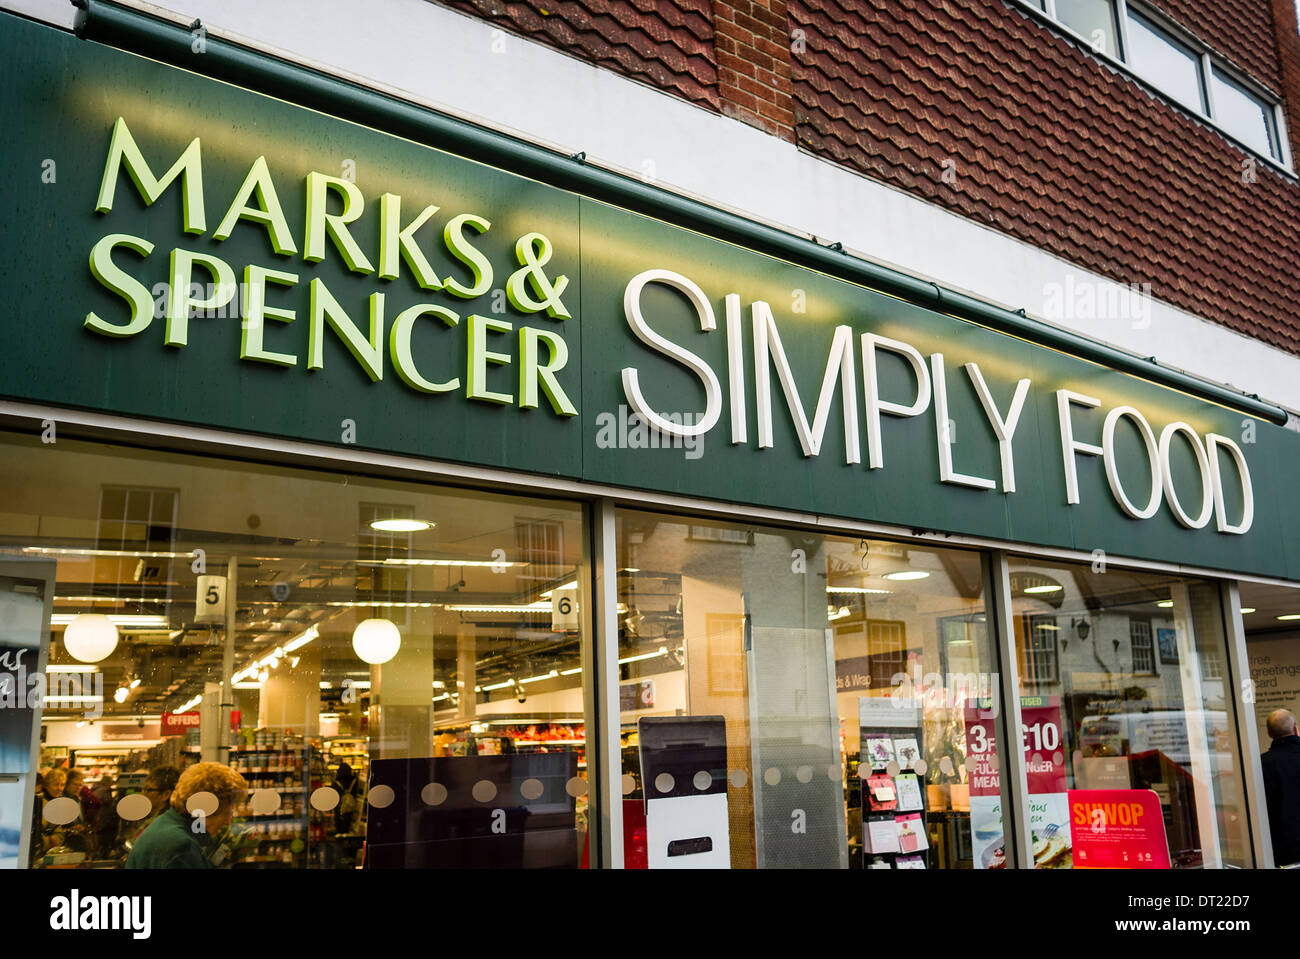 Marks & Spencer Simply Food store in Devizes UK Stock Photo